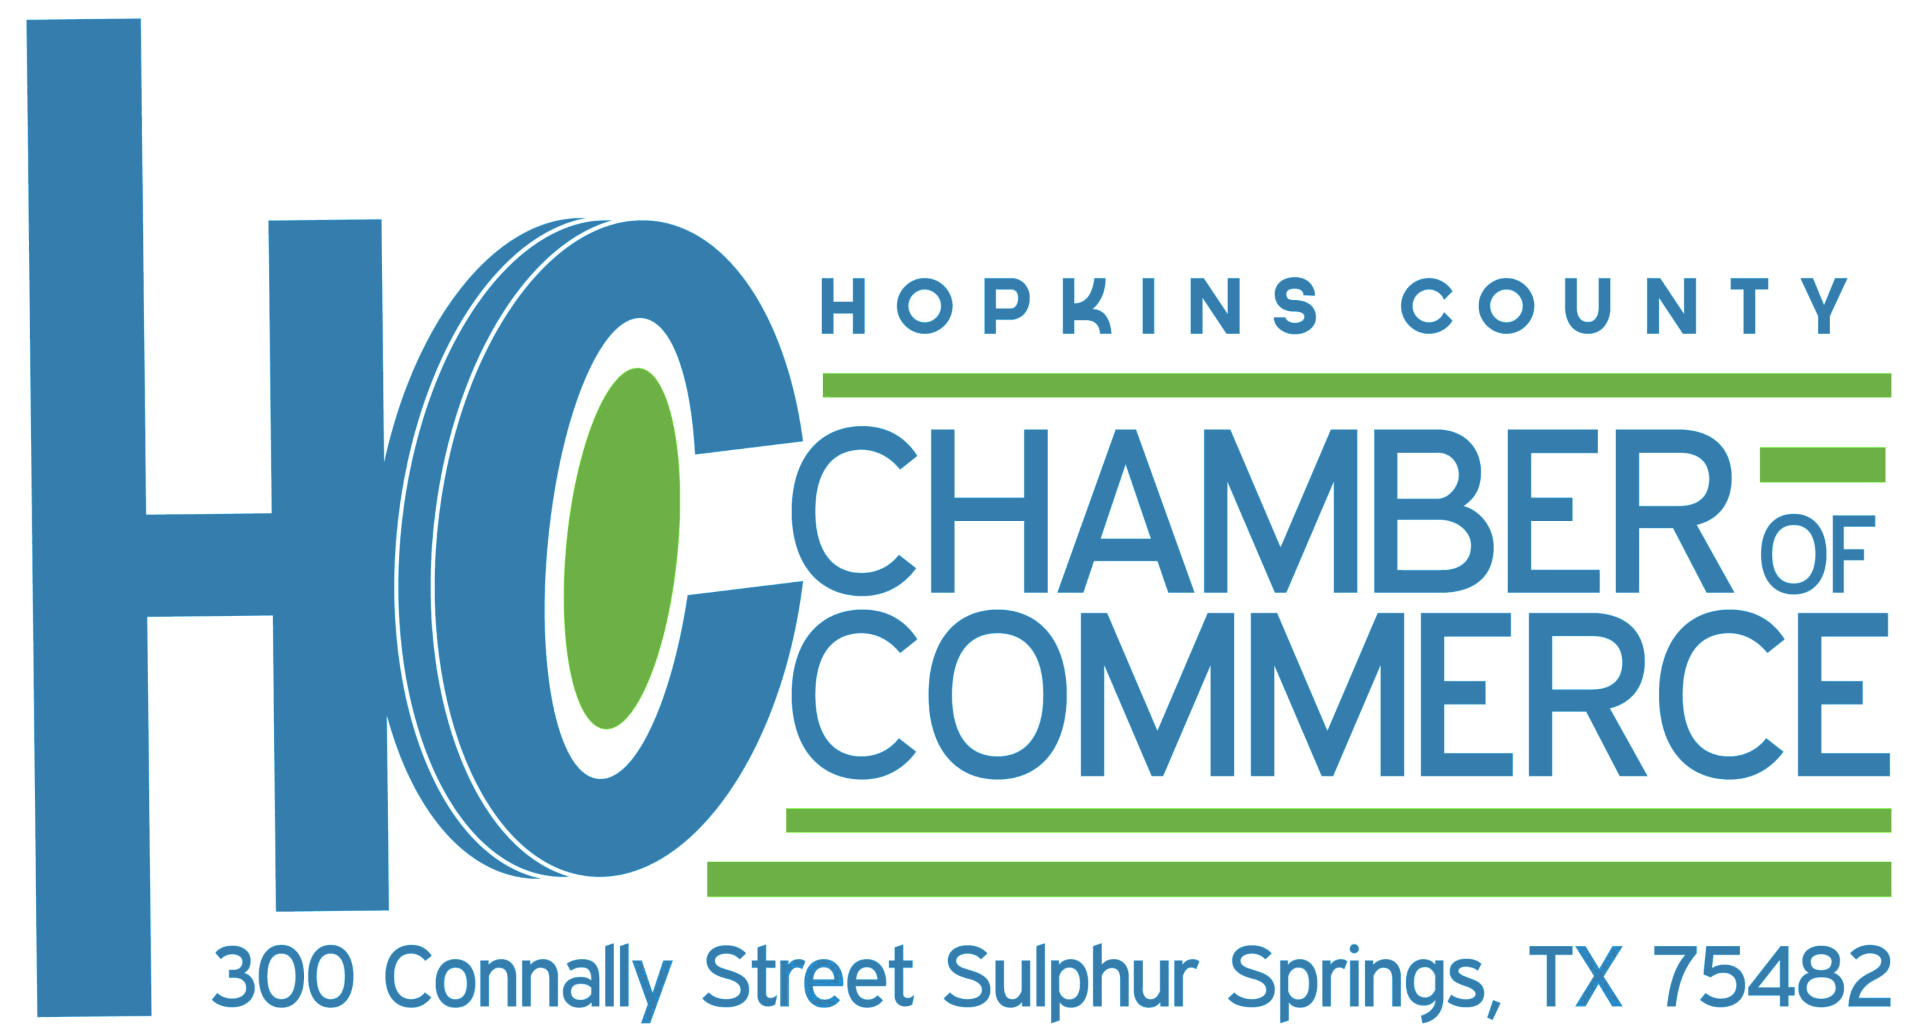 Hopkins County Chamber of Commerce Golf Tournament Set for April 14th